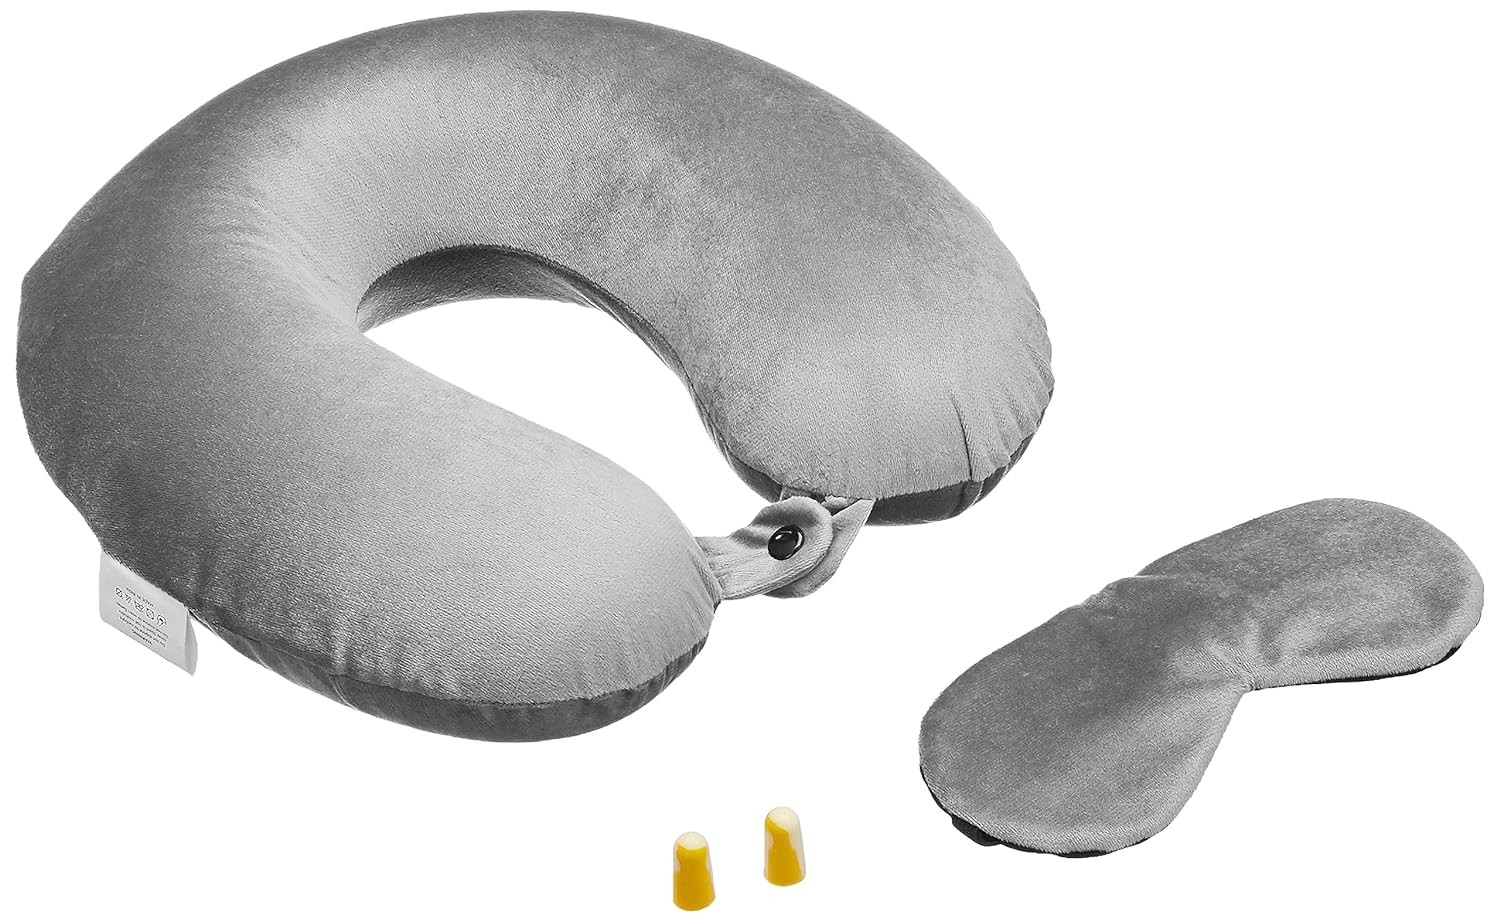 Memory Foam Travel Neck Pillow with Eye Mask and Ear Plugs Combo